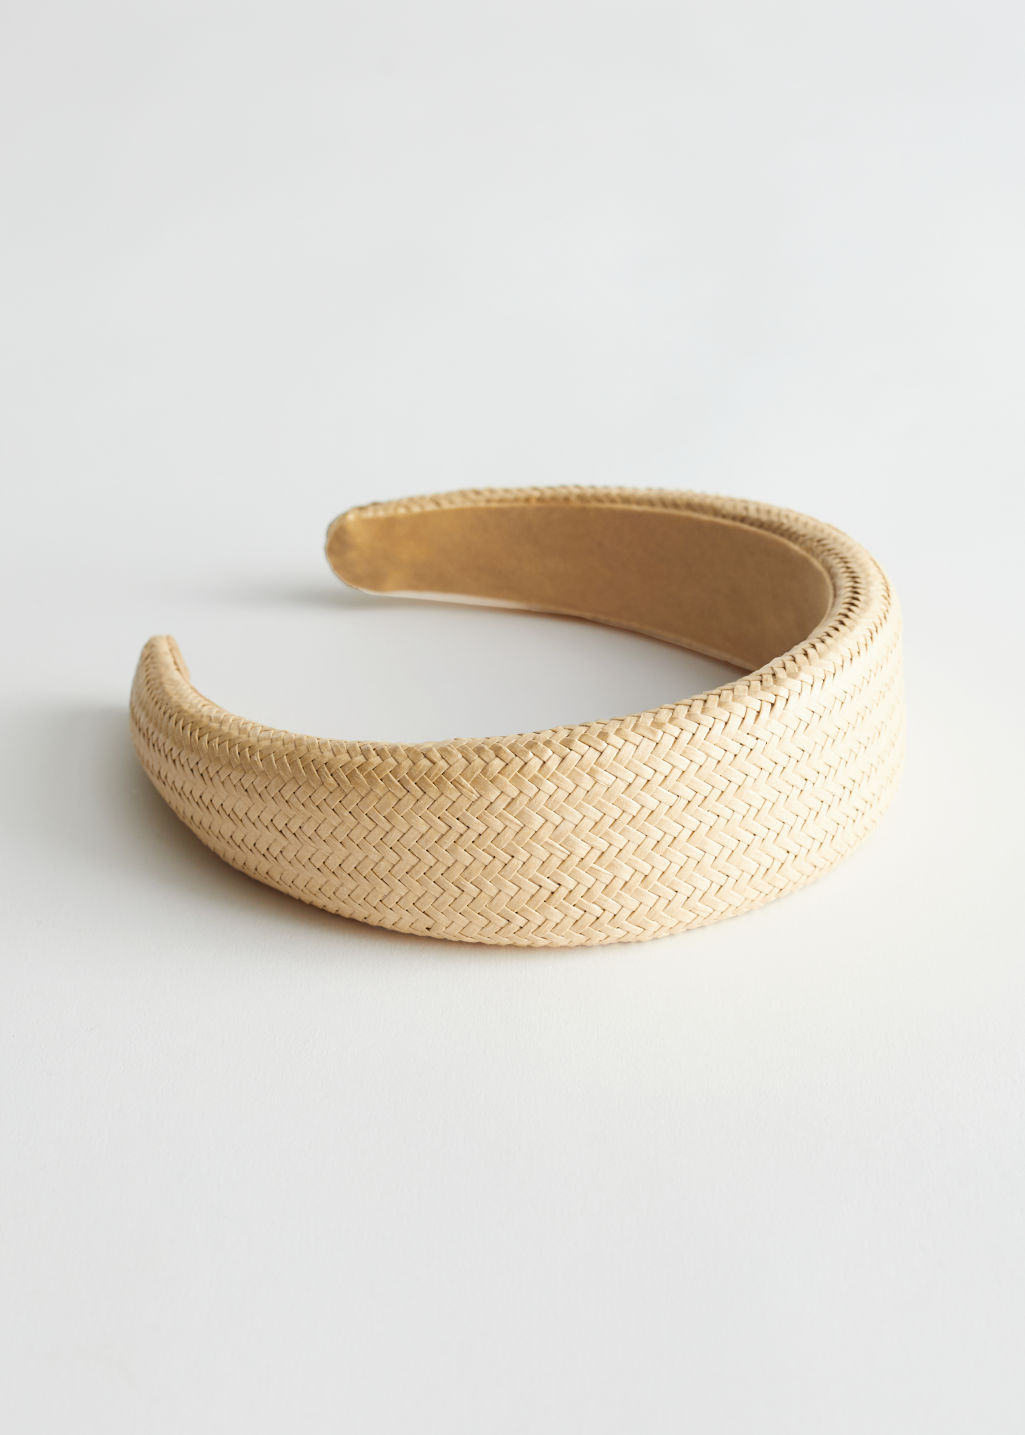 Woven Straw Alice Headband - Natural Straw - Hairaccessories - & Other Stories